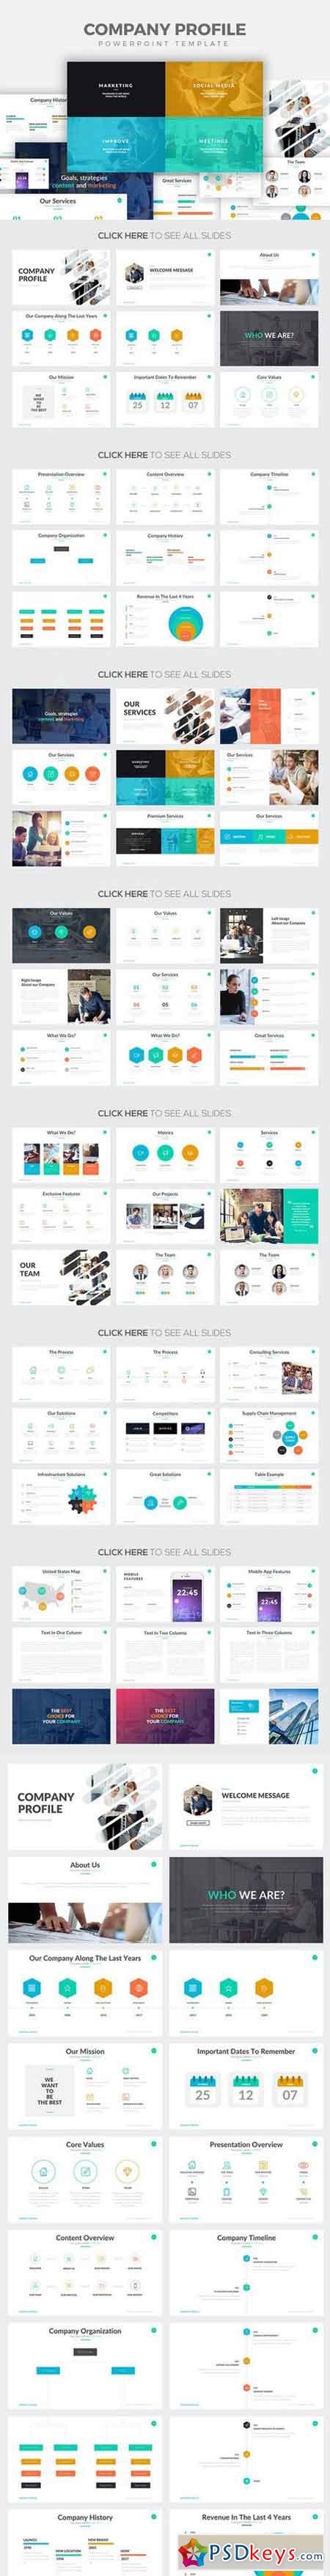 Company Profile Powerpoint Template 800462